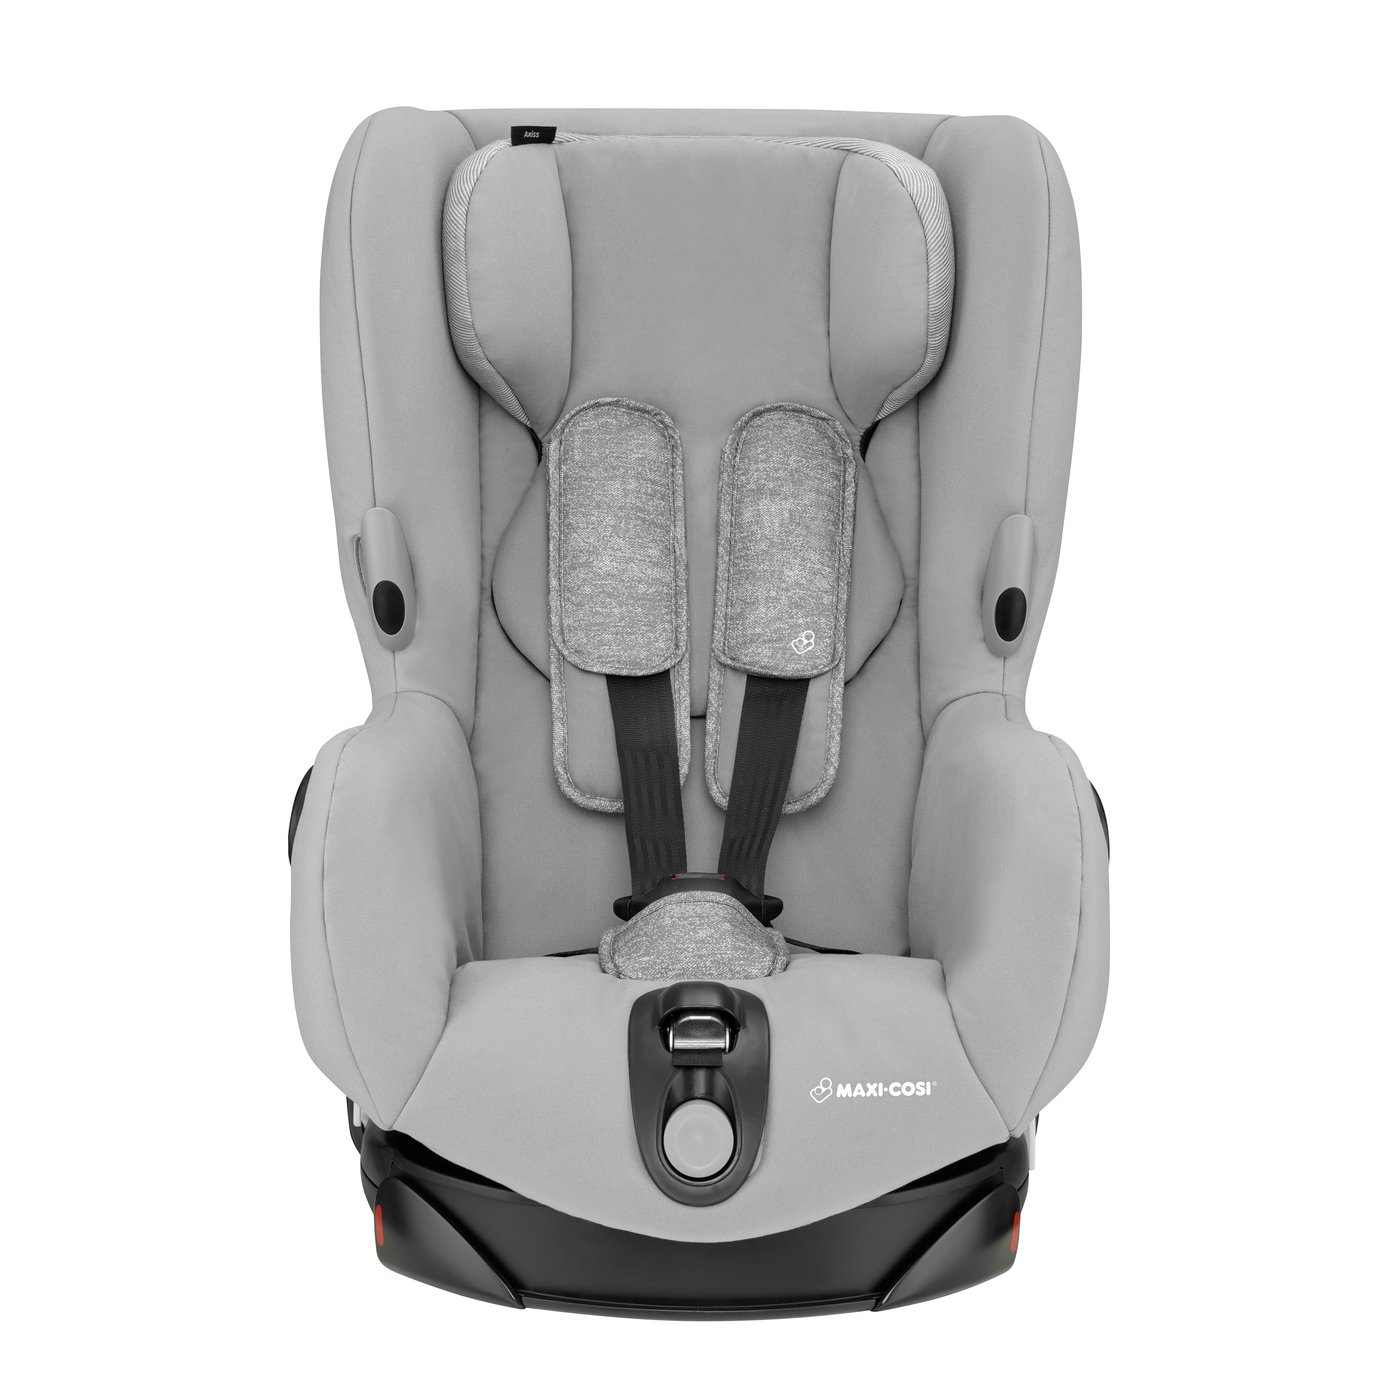 Maxi-Cosi Axiss Group 1 Car Seat Review